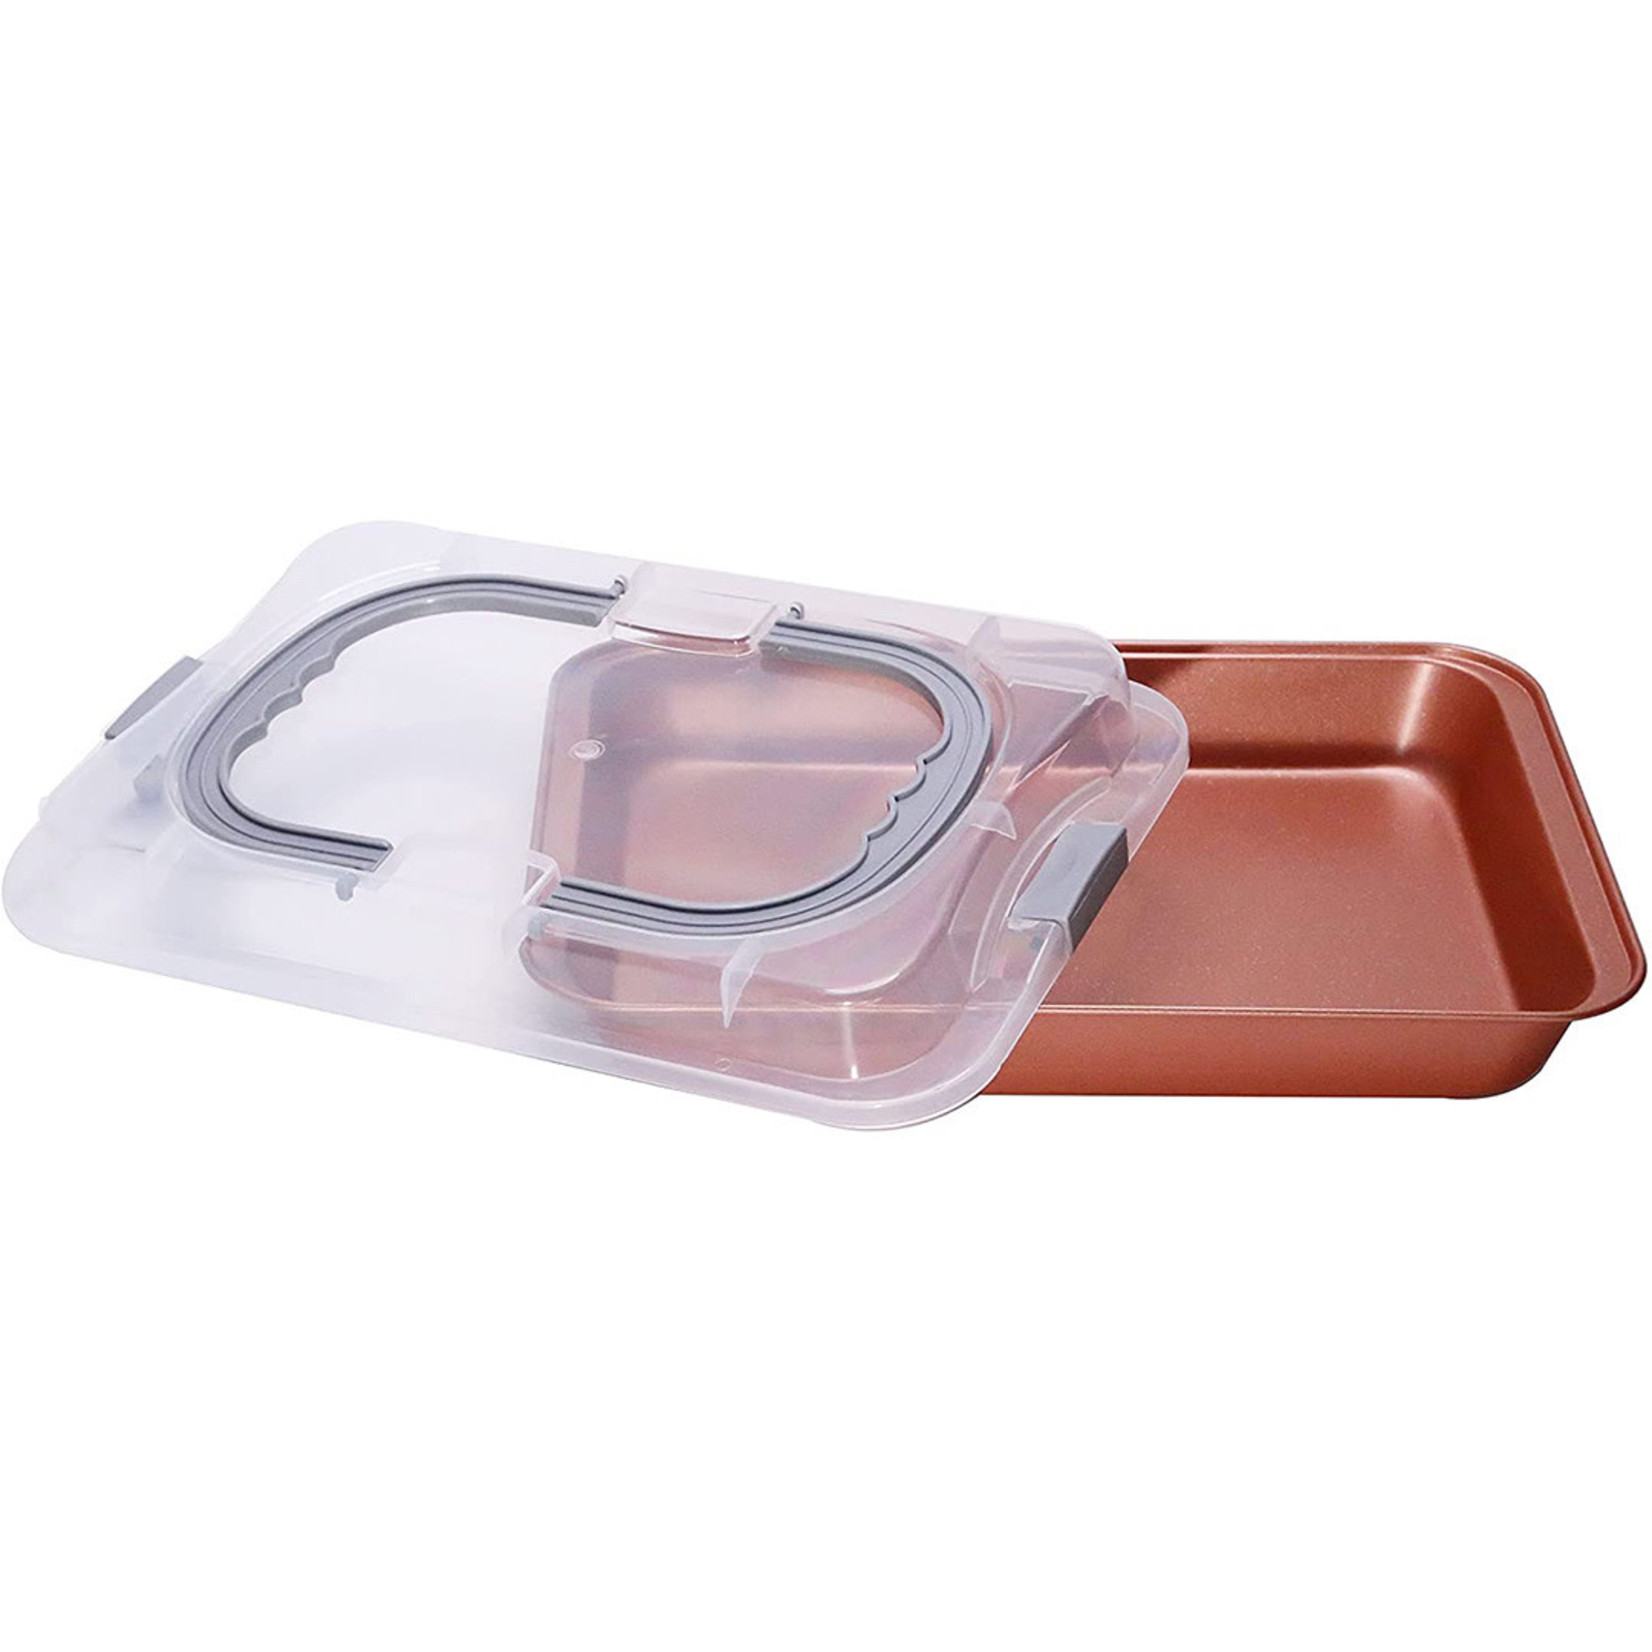 9 In. X 13 In. Copper Bakeware Covered Cake Pan